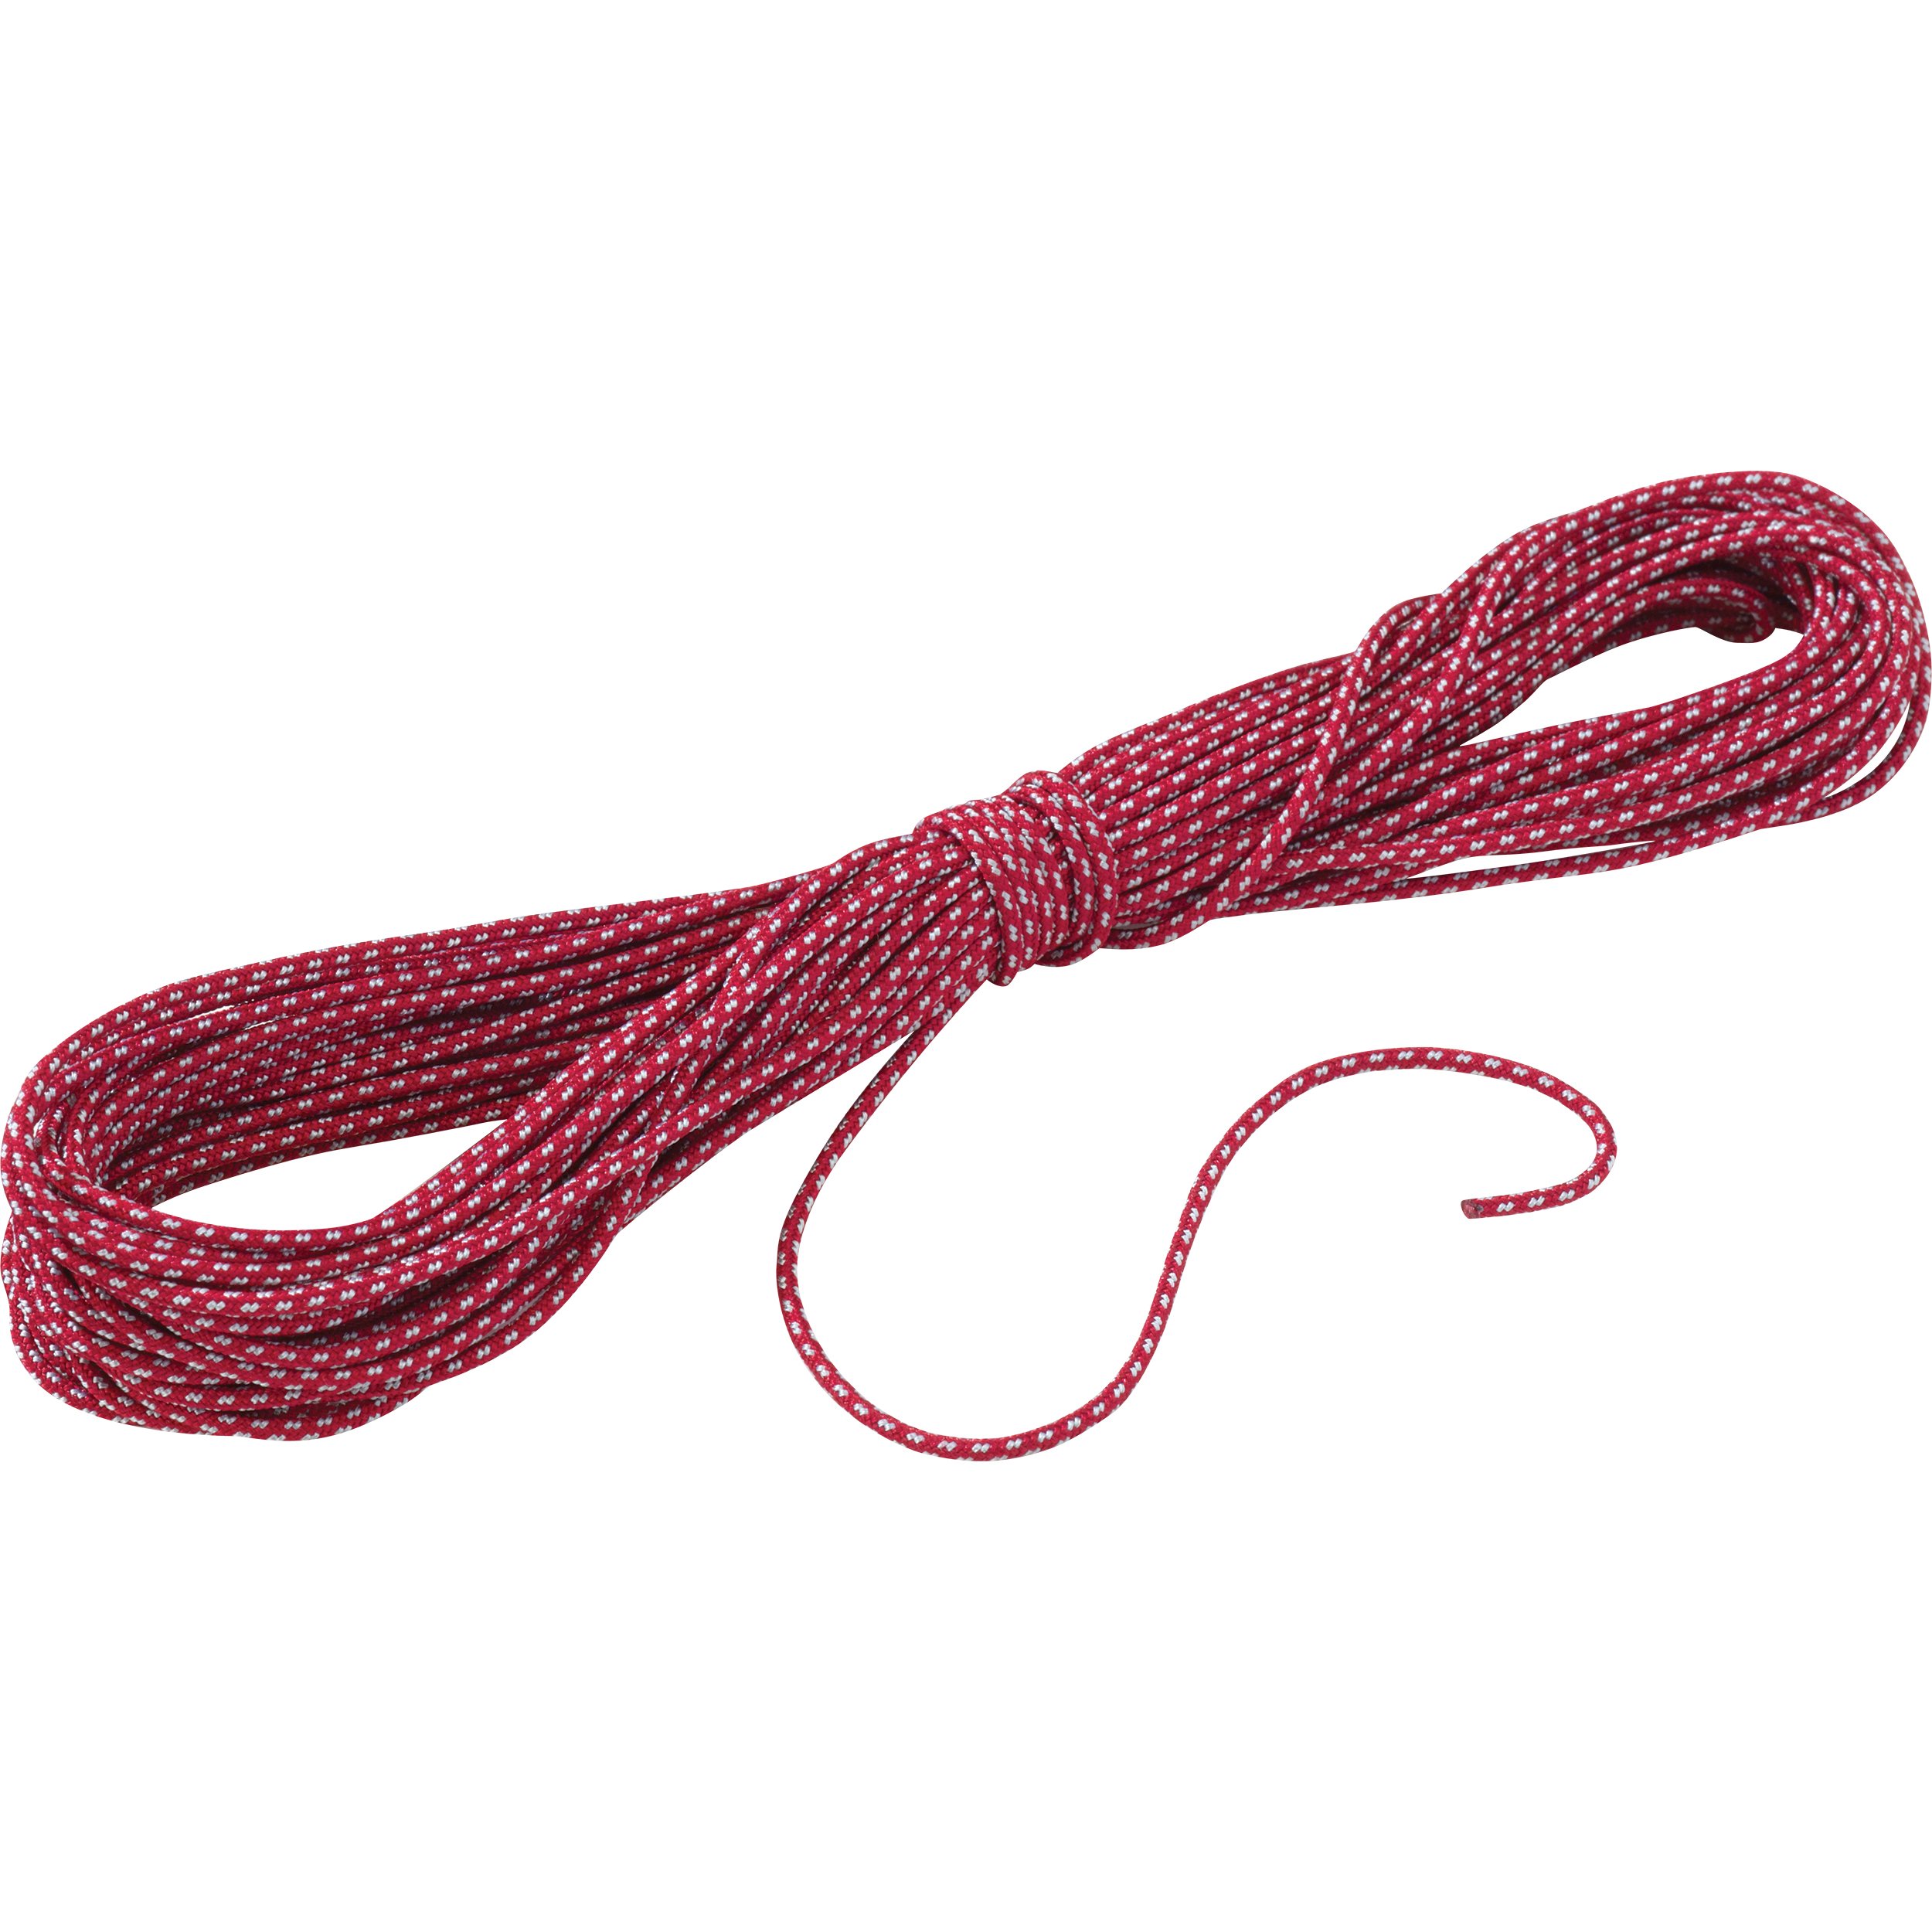 Ultralight Cord Reflective Cord for Tent Anchoring